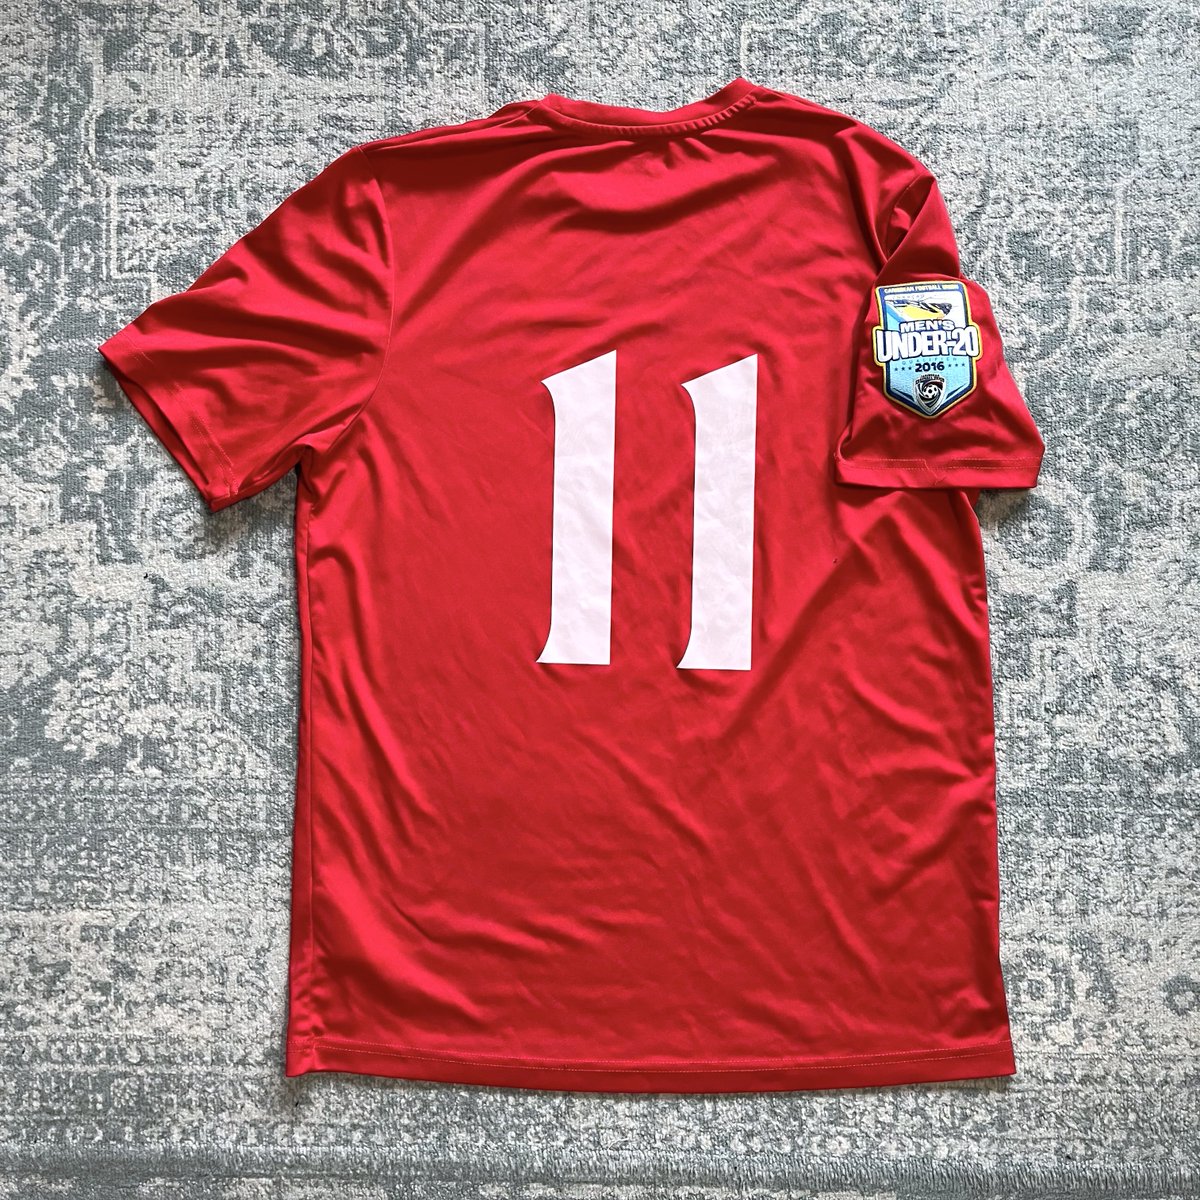 Trinidad & Tobago 🇹🇹 The world’s most boring football shirt – with the most spectacular sleeve patch! Worn by Kareem Riley in the final qualifying round for the 2017 CONCACAF U-20 Championship, which took place in Curaçao in 2016. More: worldshirts.net/post/trinidad-…